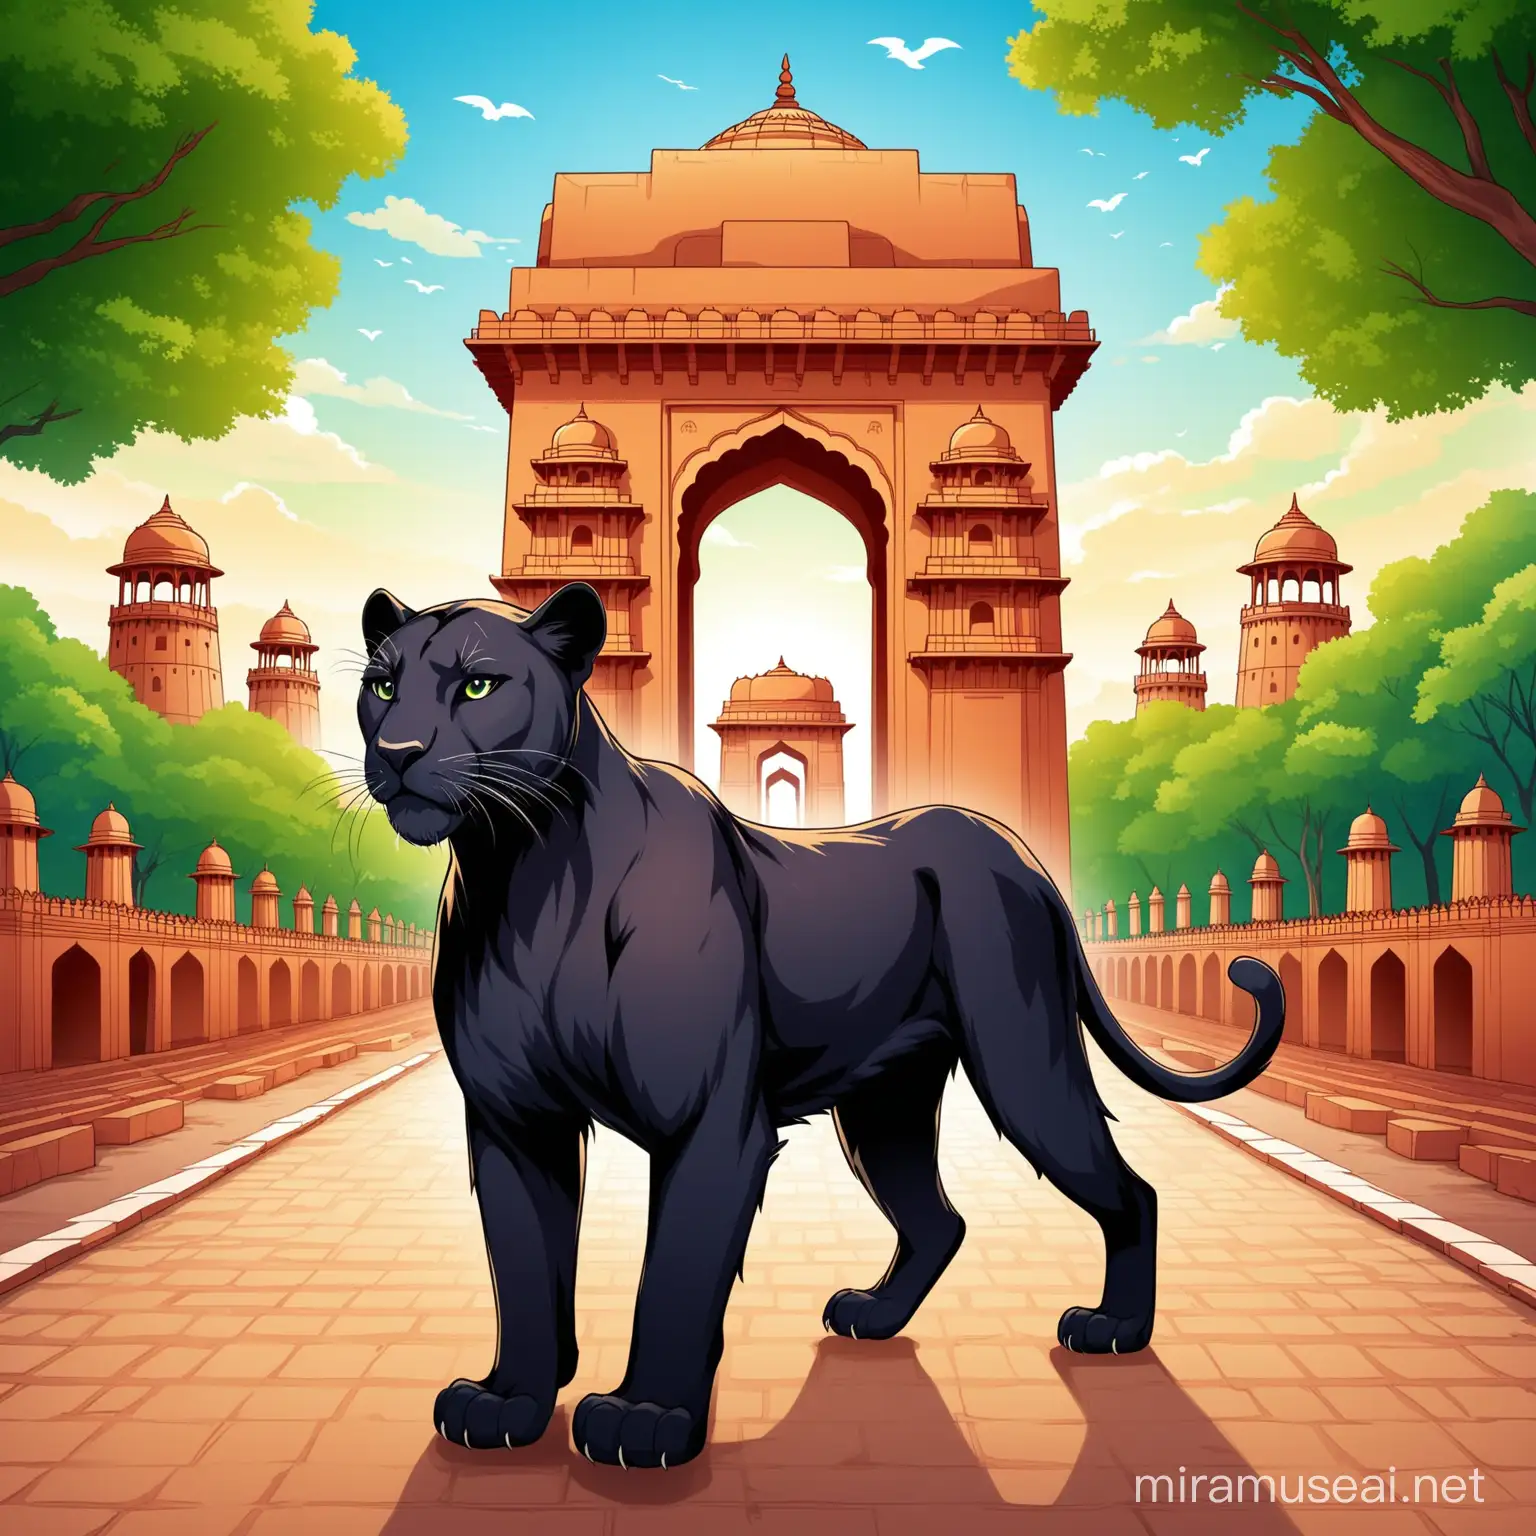 Delhi Panther Mascot Amidst Iconic Heritage Sites and Nature